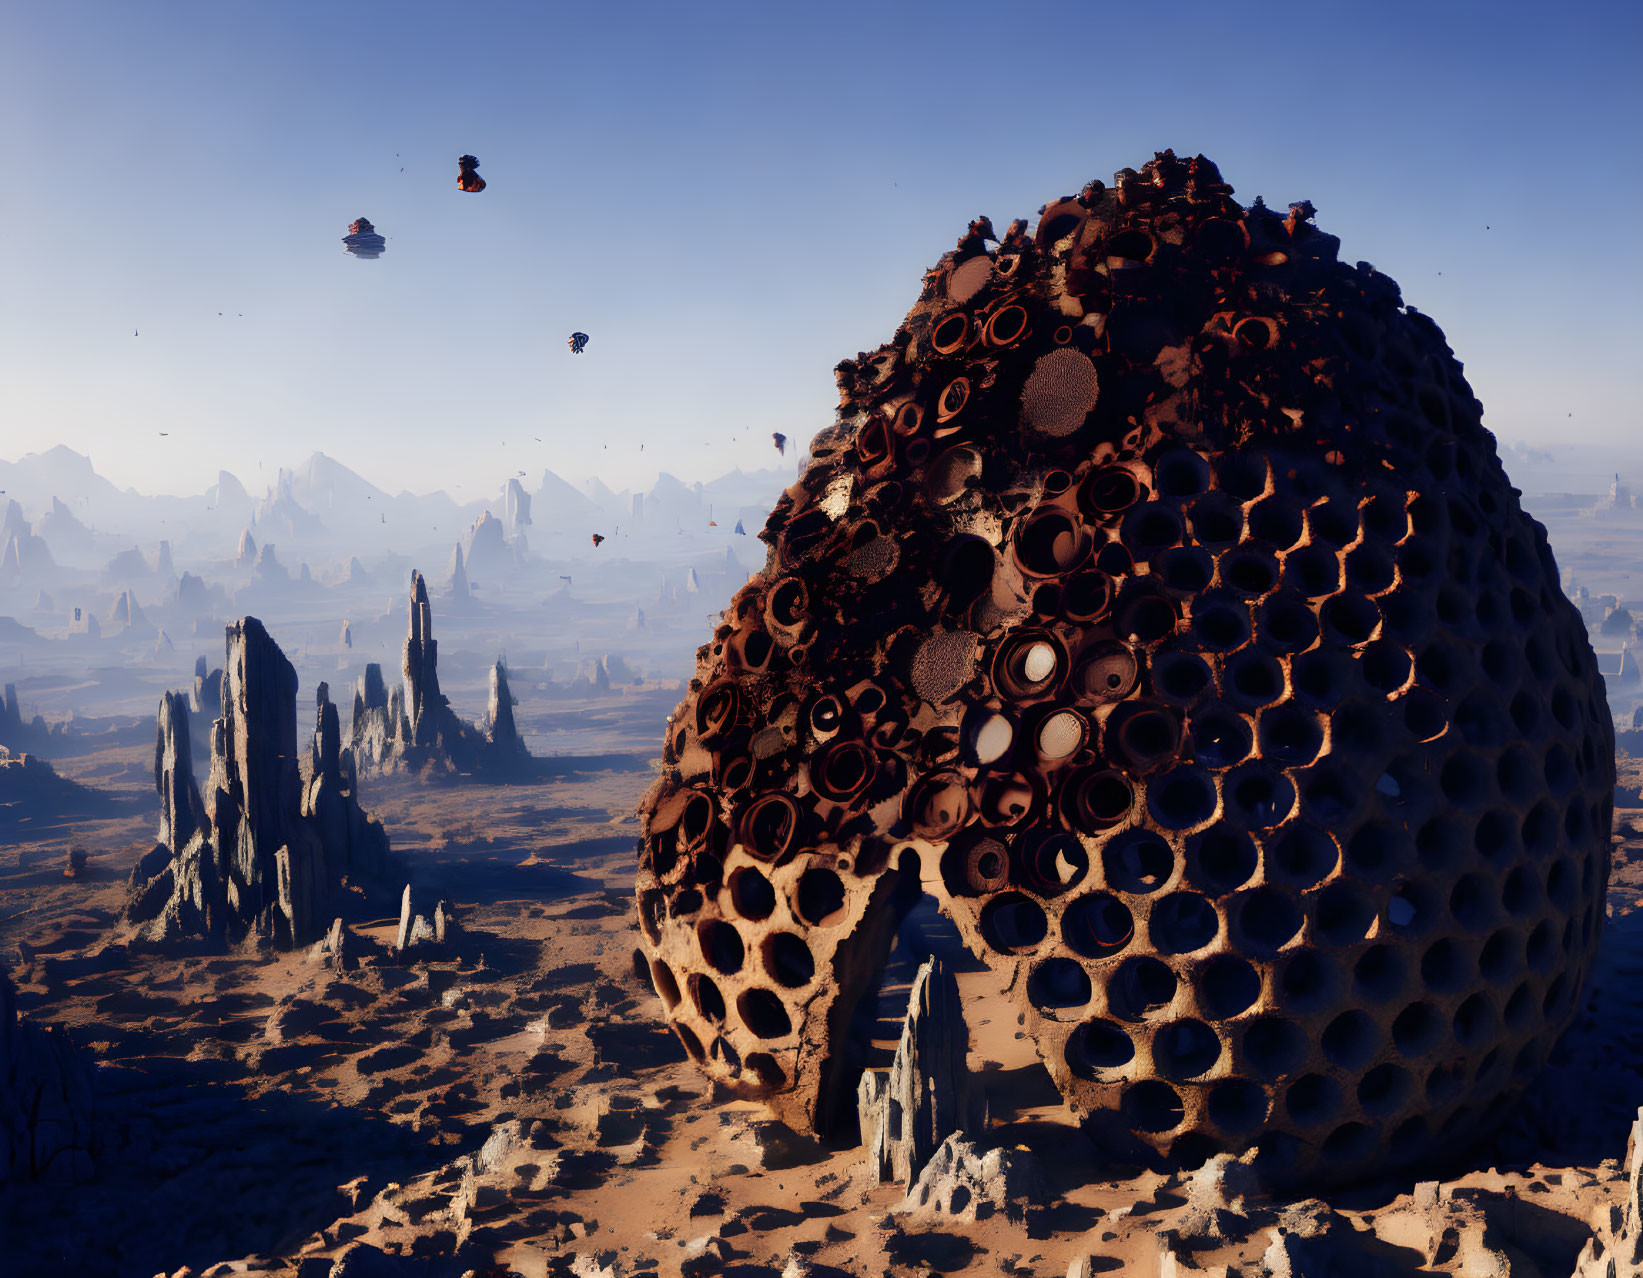 Futuristic desert landscape with dome structure, floating ships, and rock formations